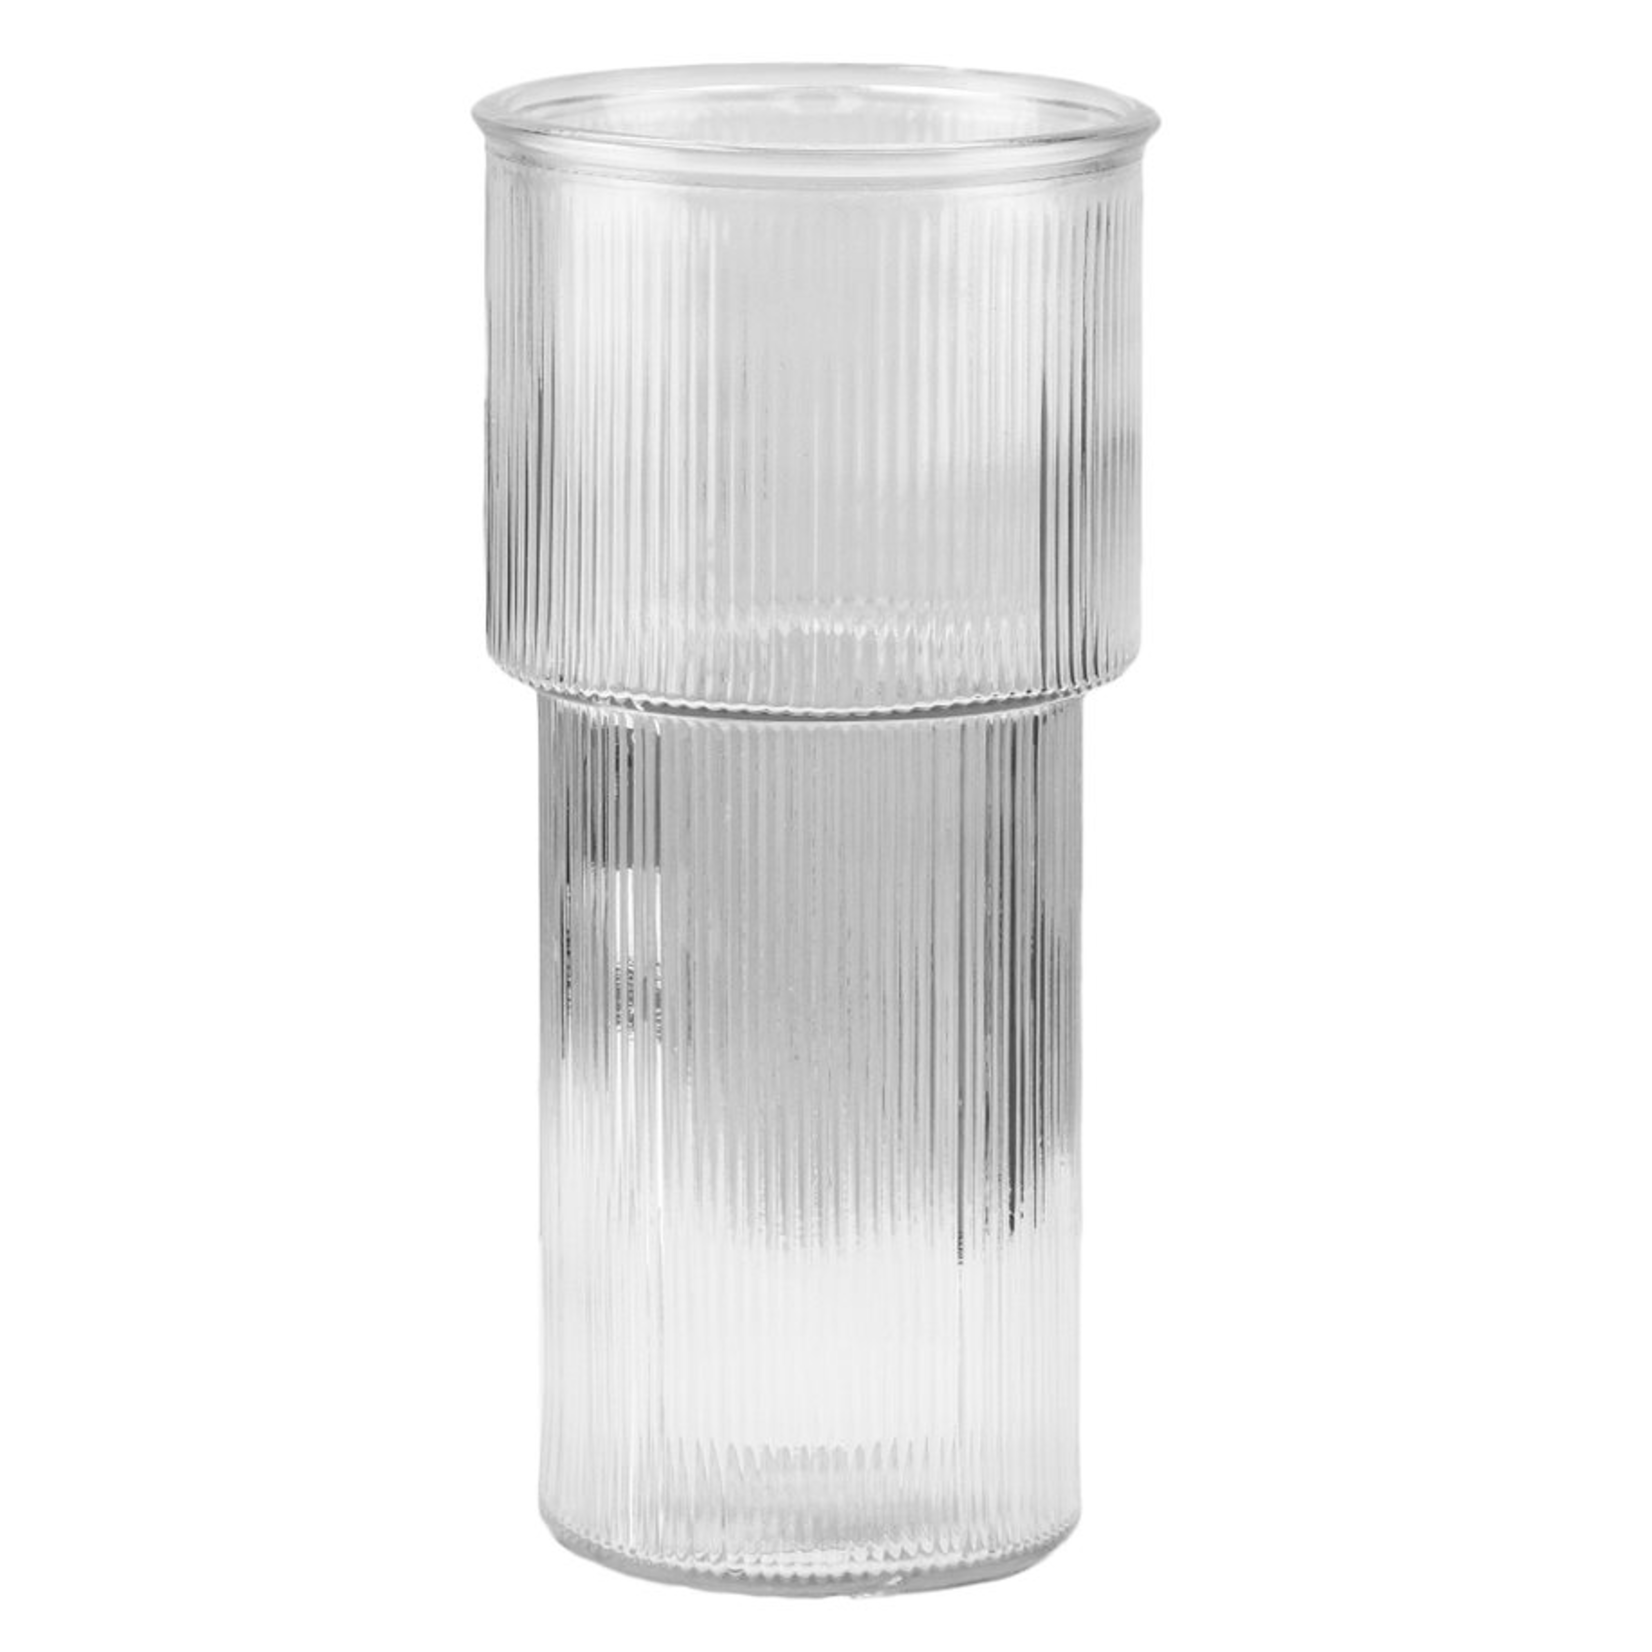 9.5”H X 4.5” CLEAR GLASS FLUTED DOUBLE CYLINDER WITH RIM